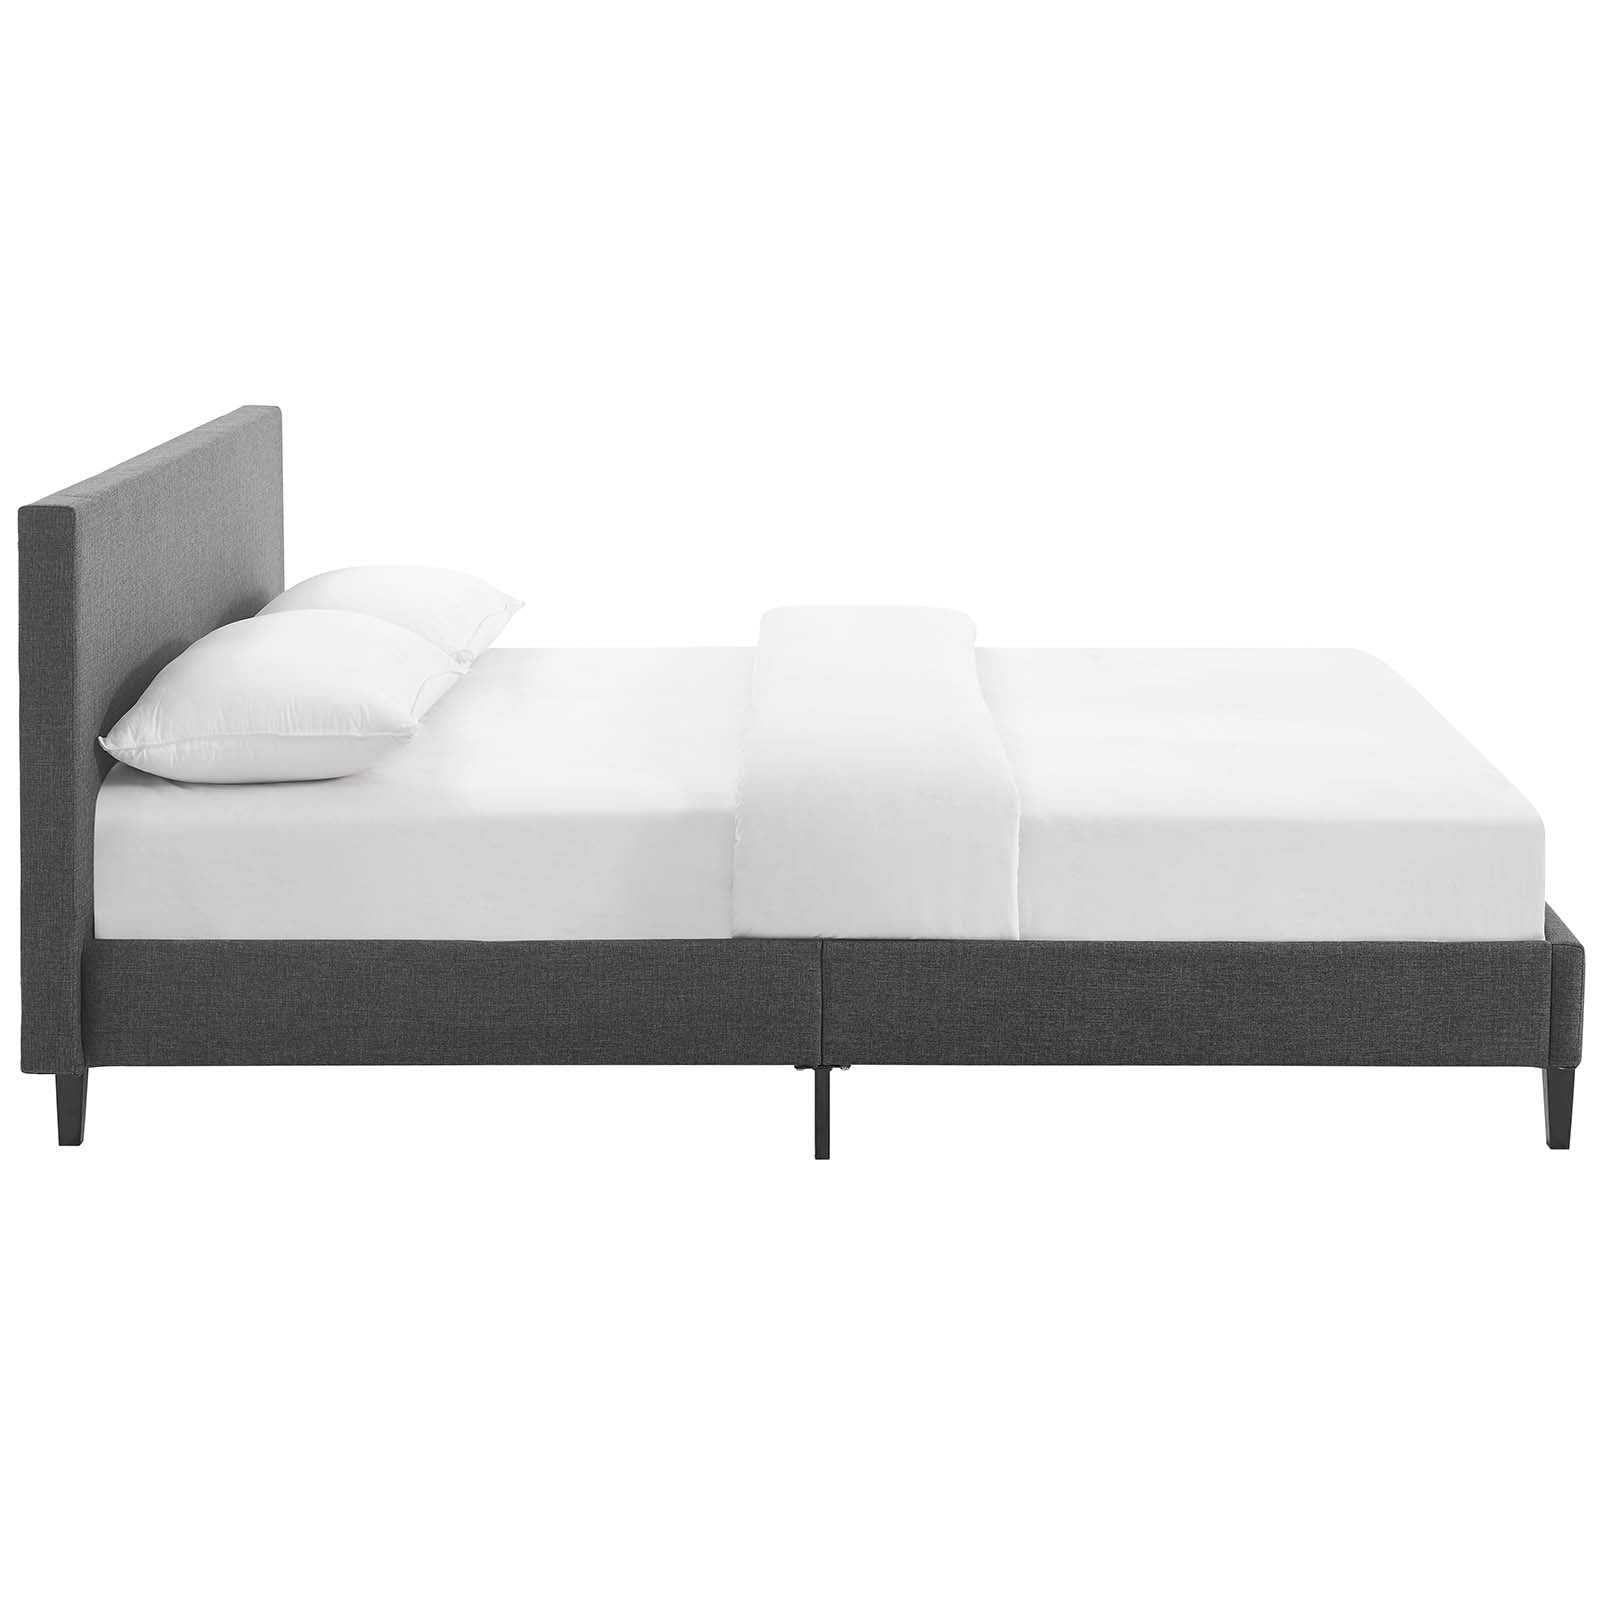 Modway Beds - Anya Full Bed Gray